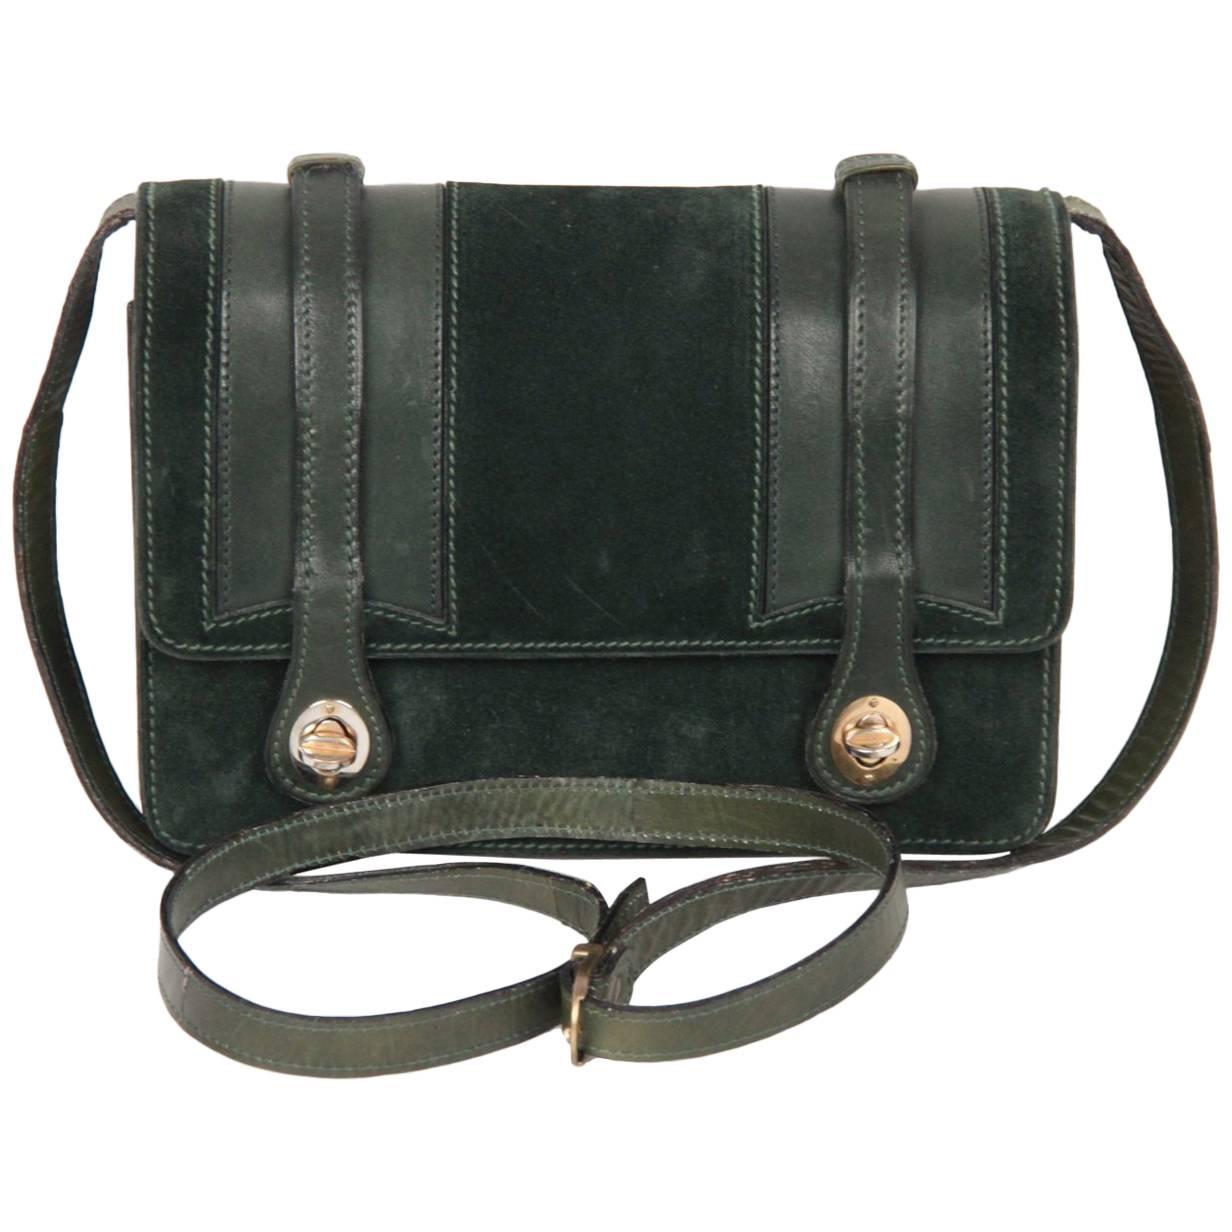 GUCCI VINTAGE Green Suede & Leather CROSSBODY BAG